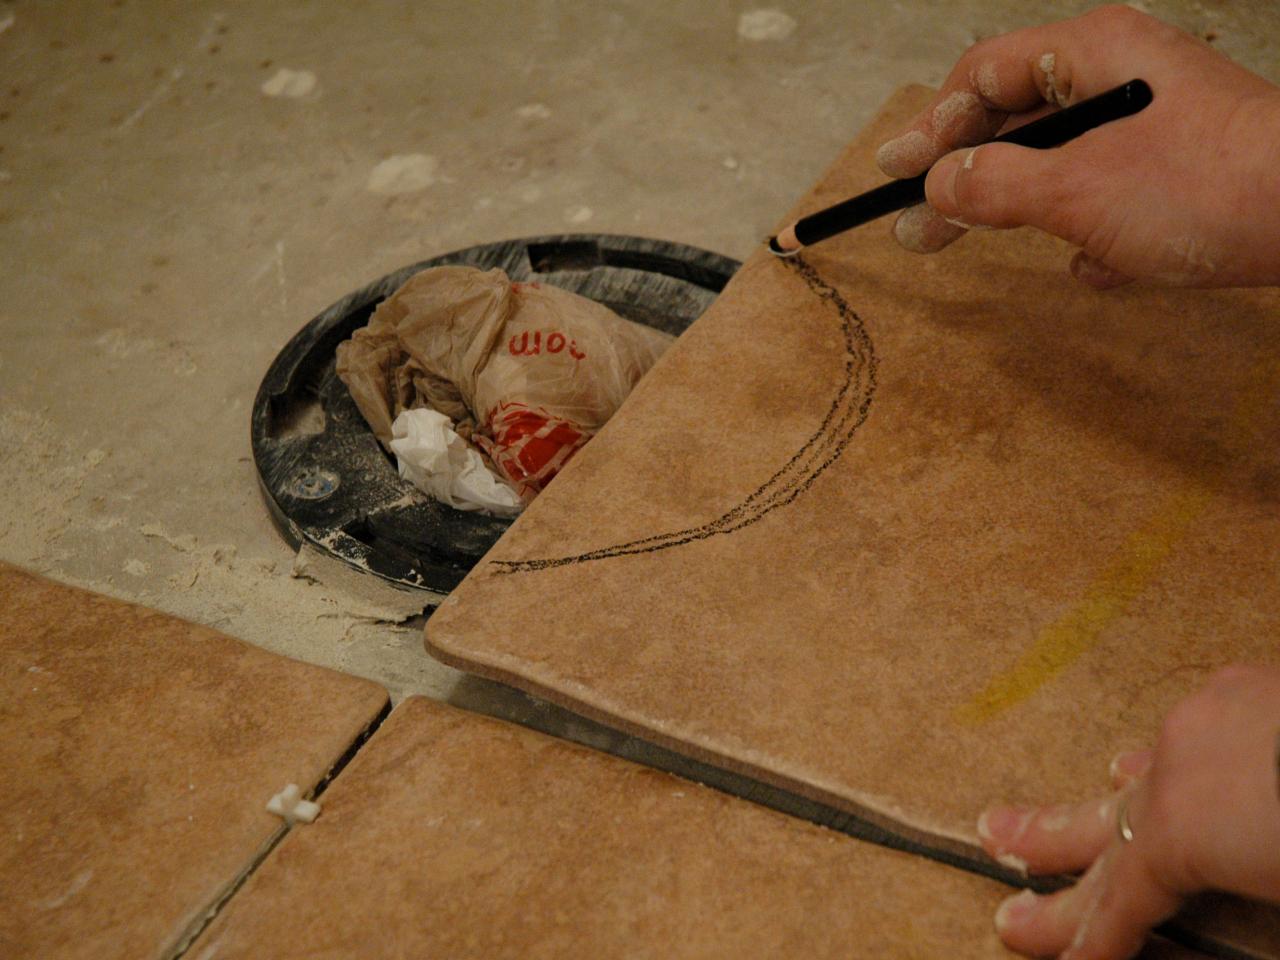 How To Install Tile On A Bathroom Floor, How To Install A Tile Bathroom Floor